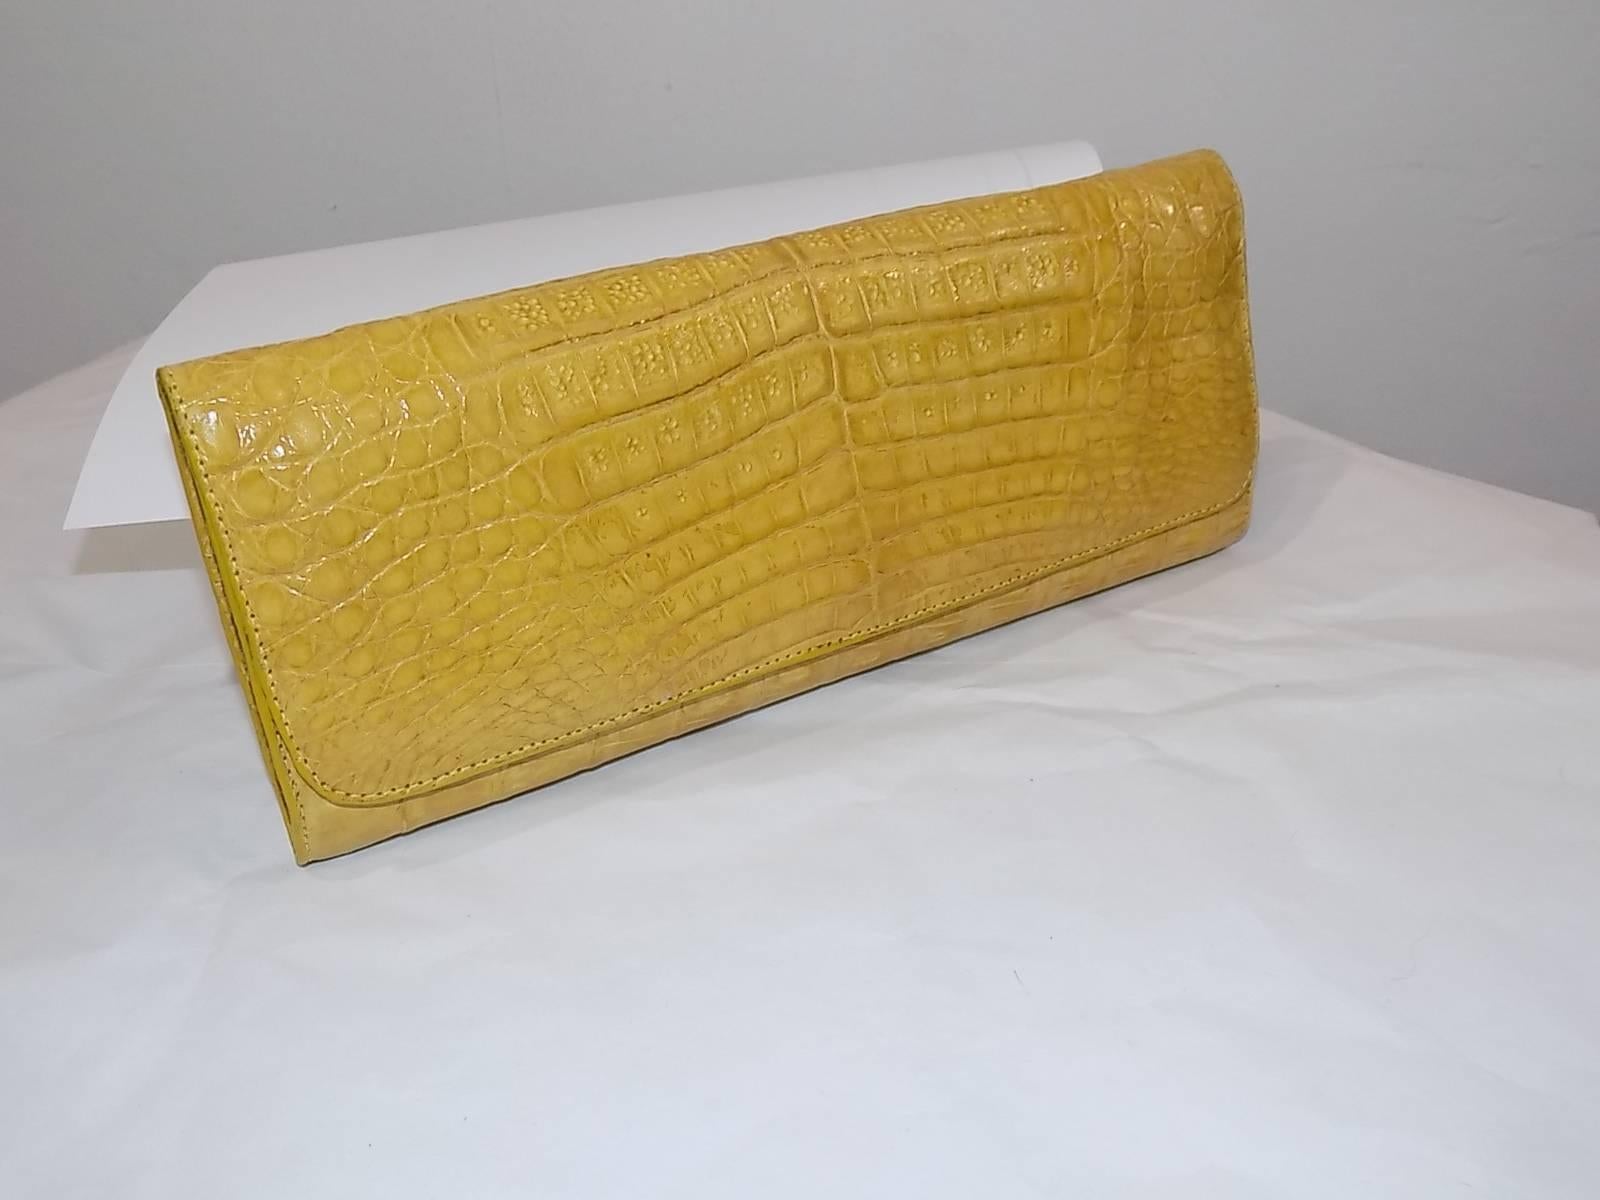 Rinkel is a luxury brand well-known for its sought after accessories elaborated in premium crocodile skins using traditional techniques and high end Italian hardware.This is hardly ever used Alligator  Luxury  evening Clutch Bag  in rich yellow